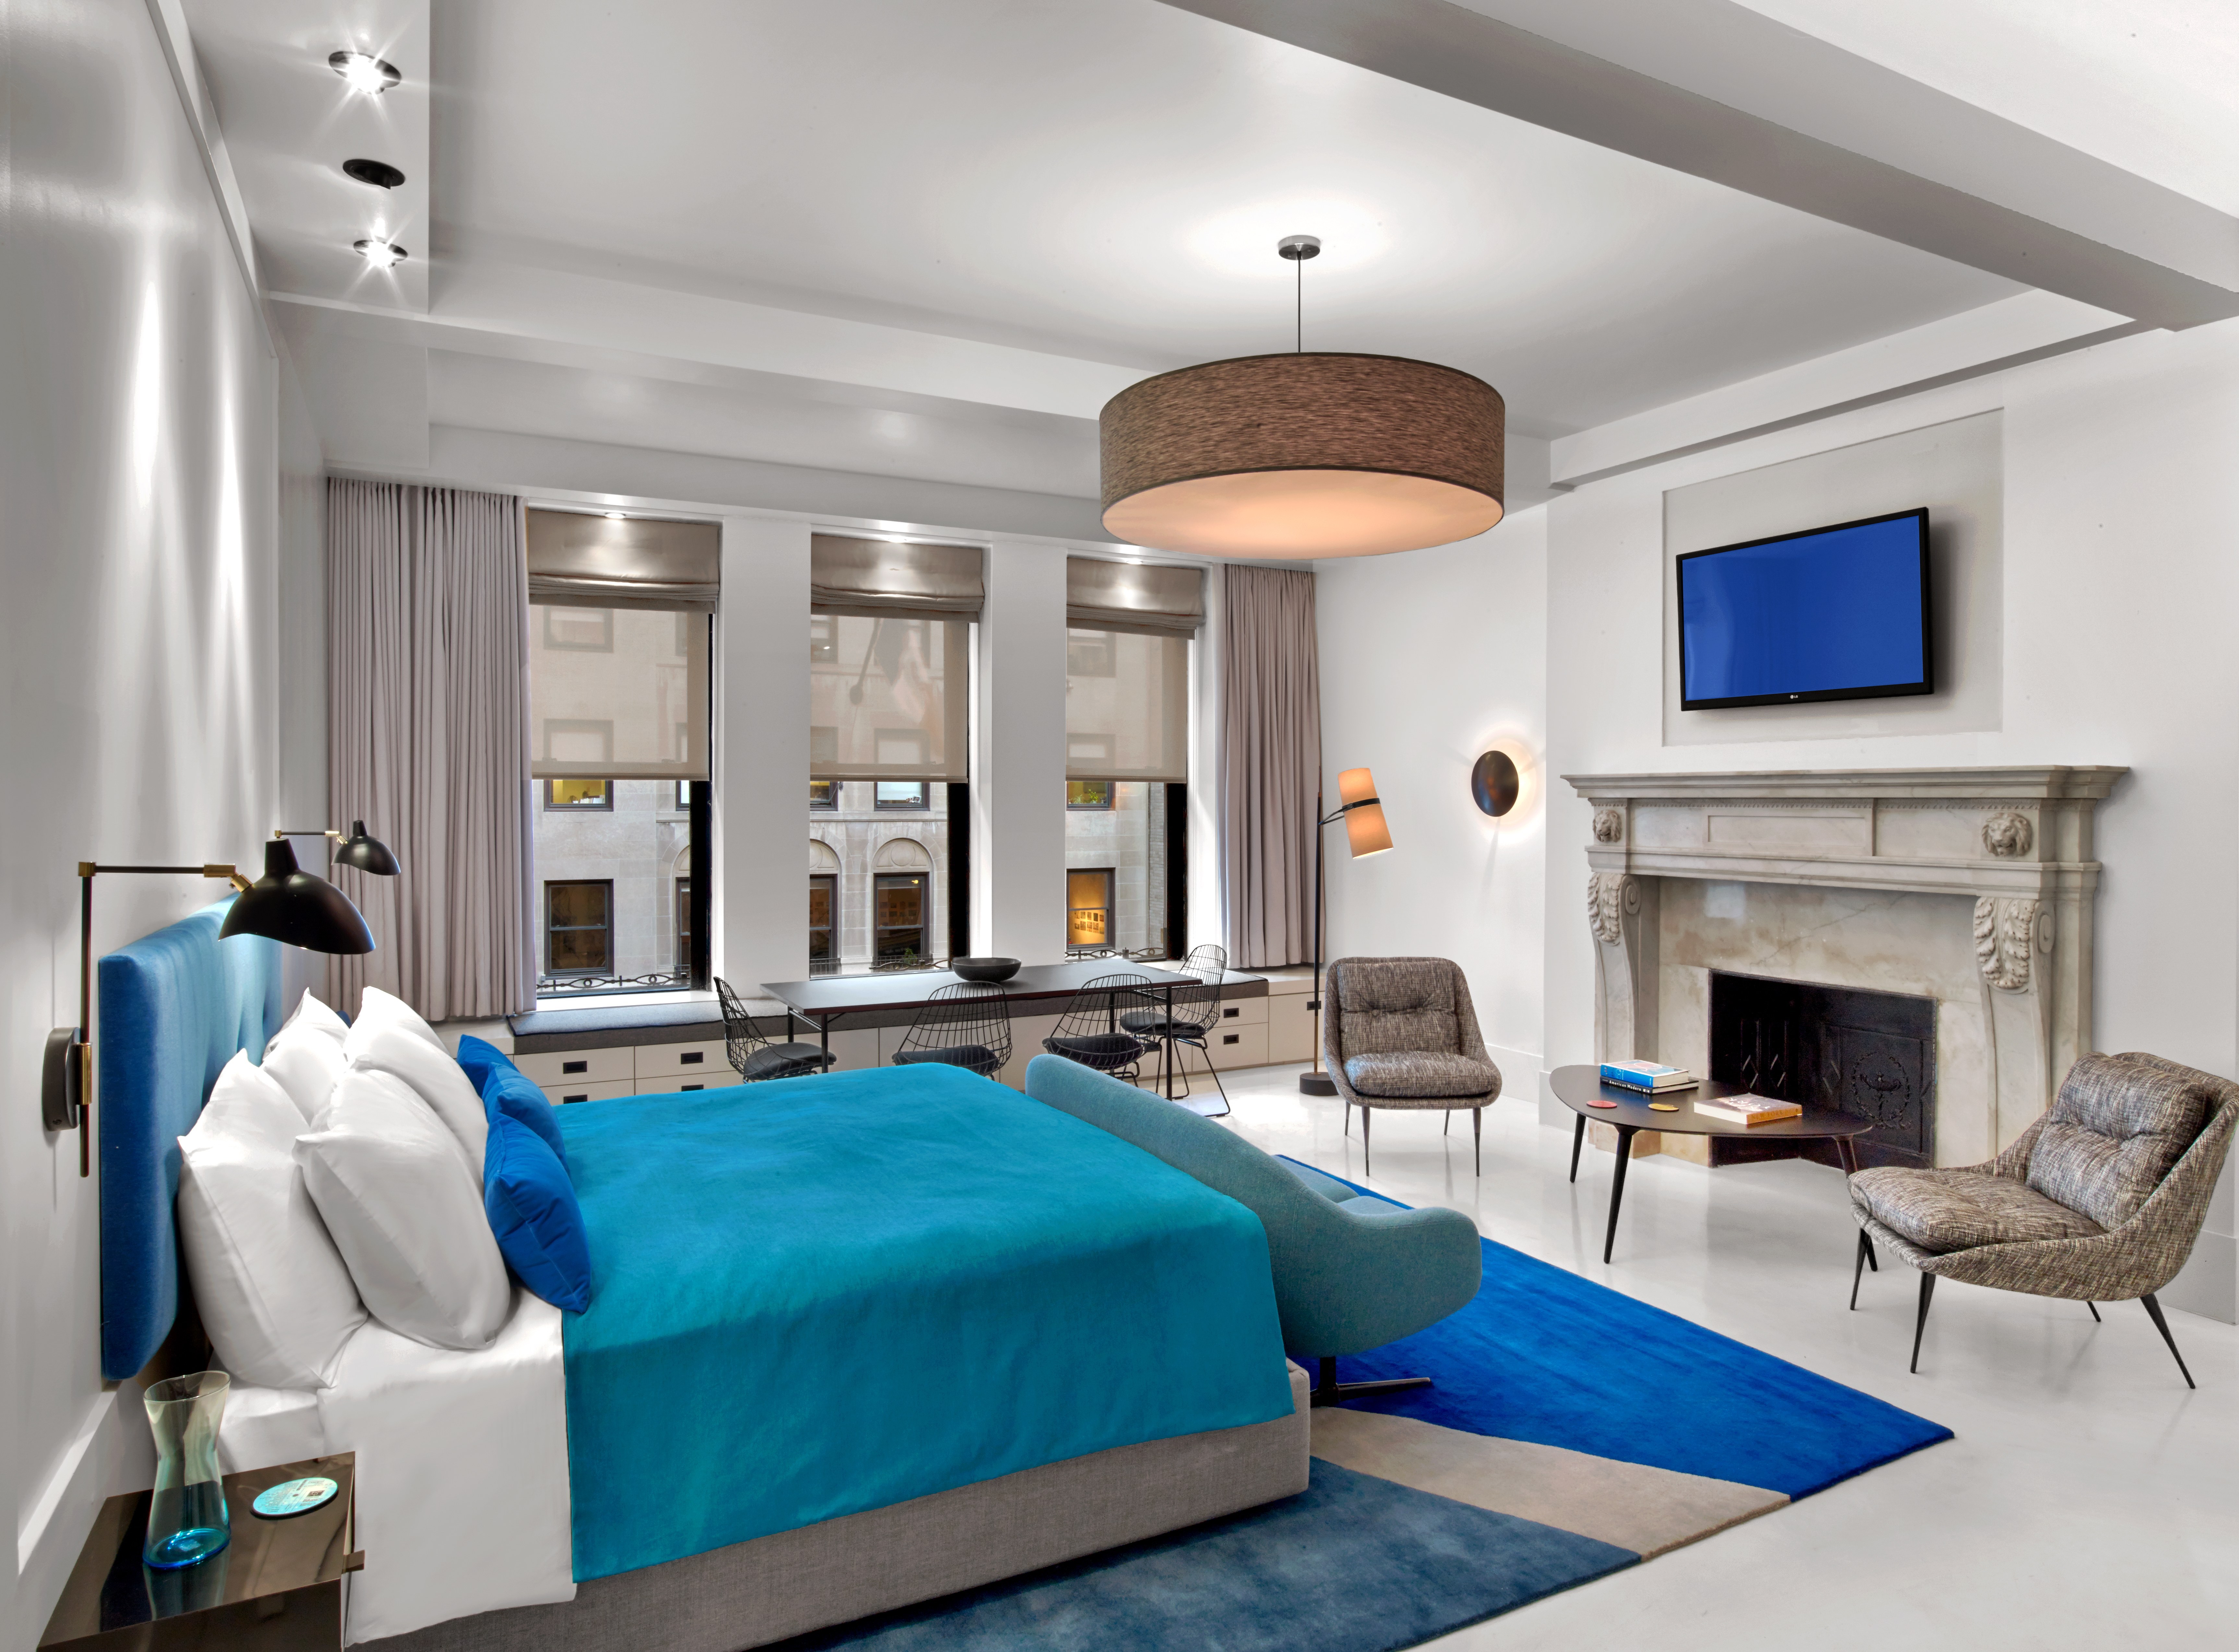 10 Design Ideas To Steal From Hotels HuffPost